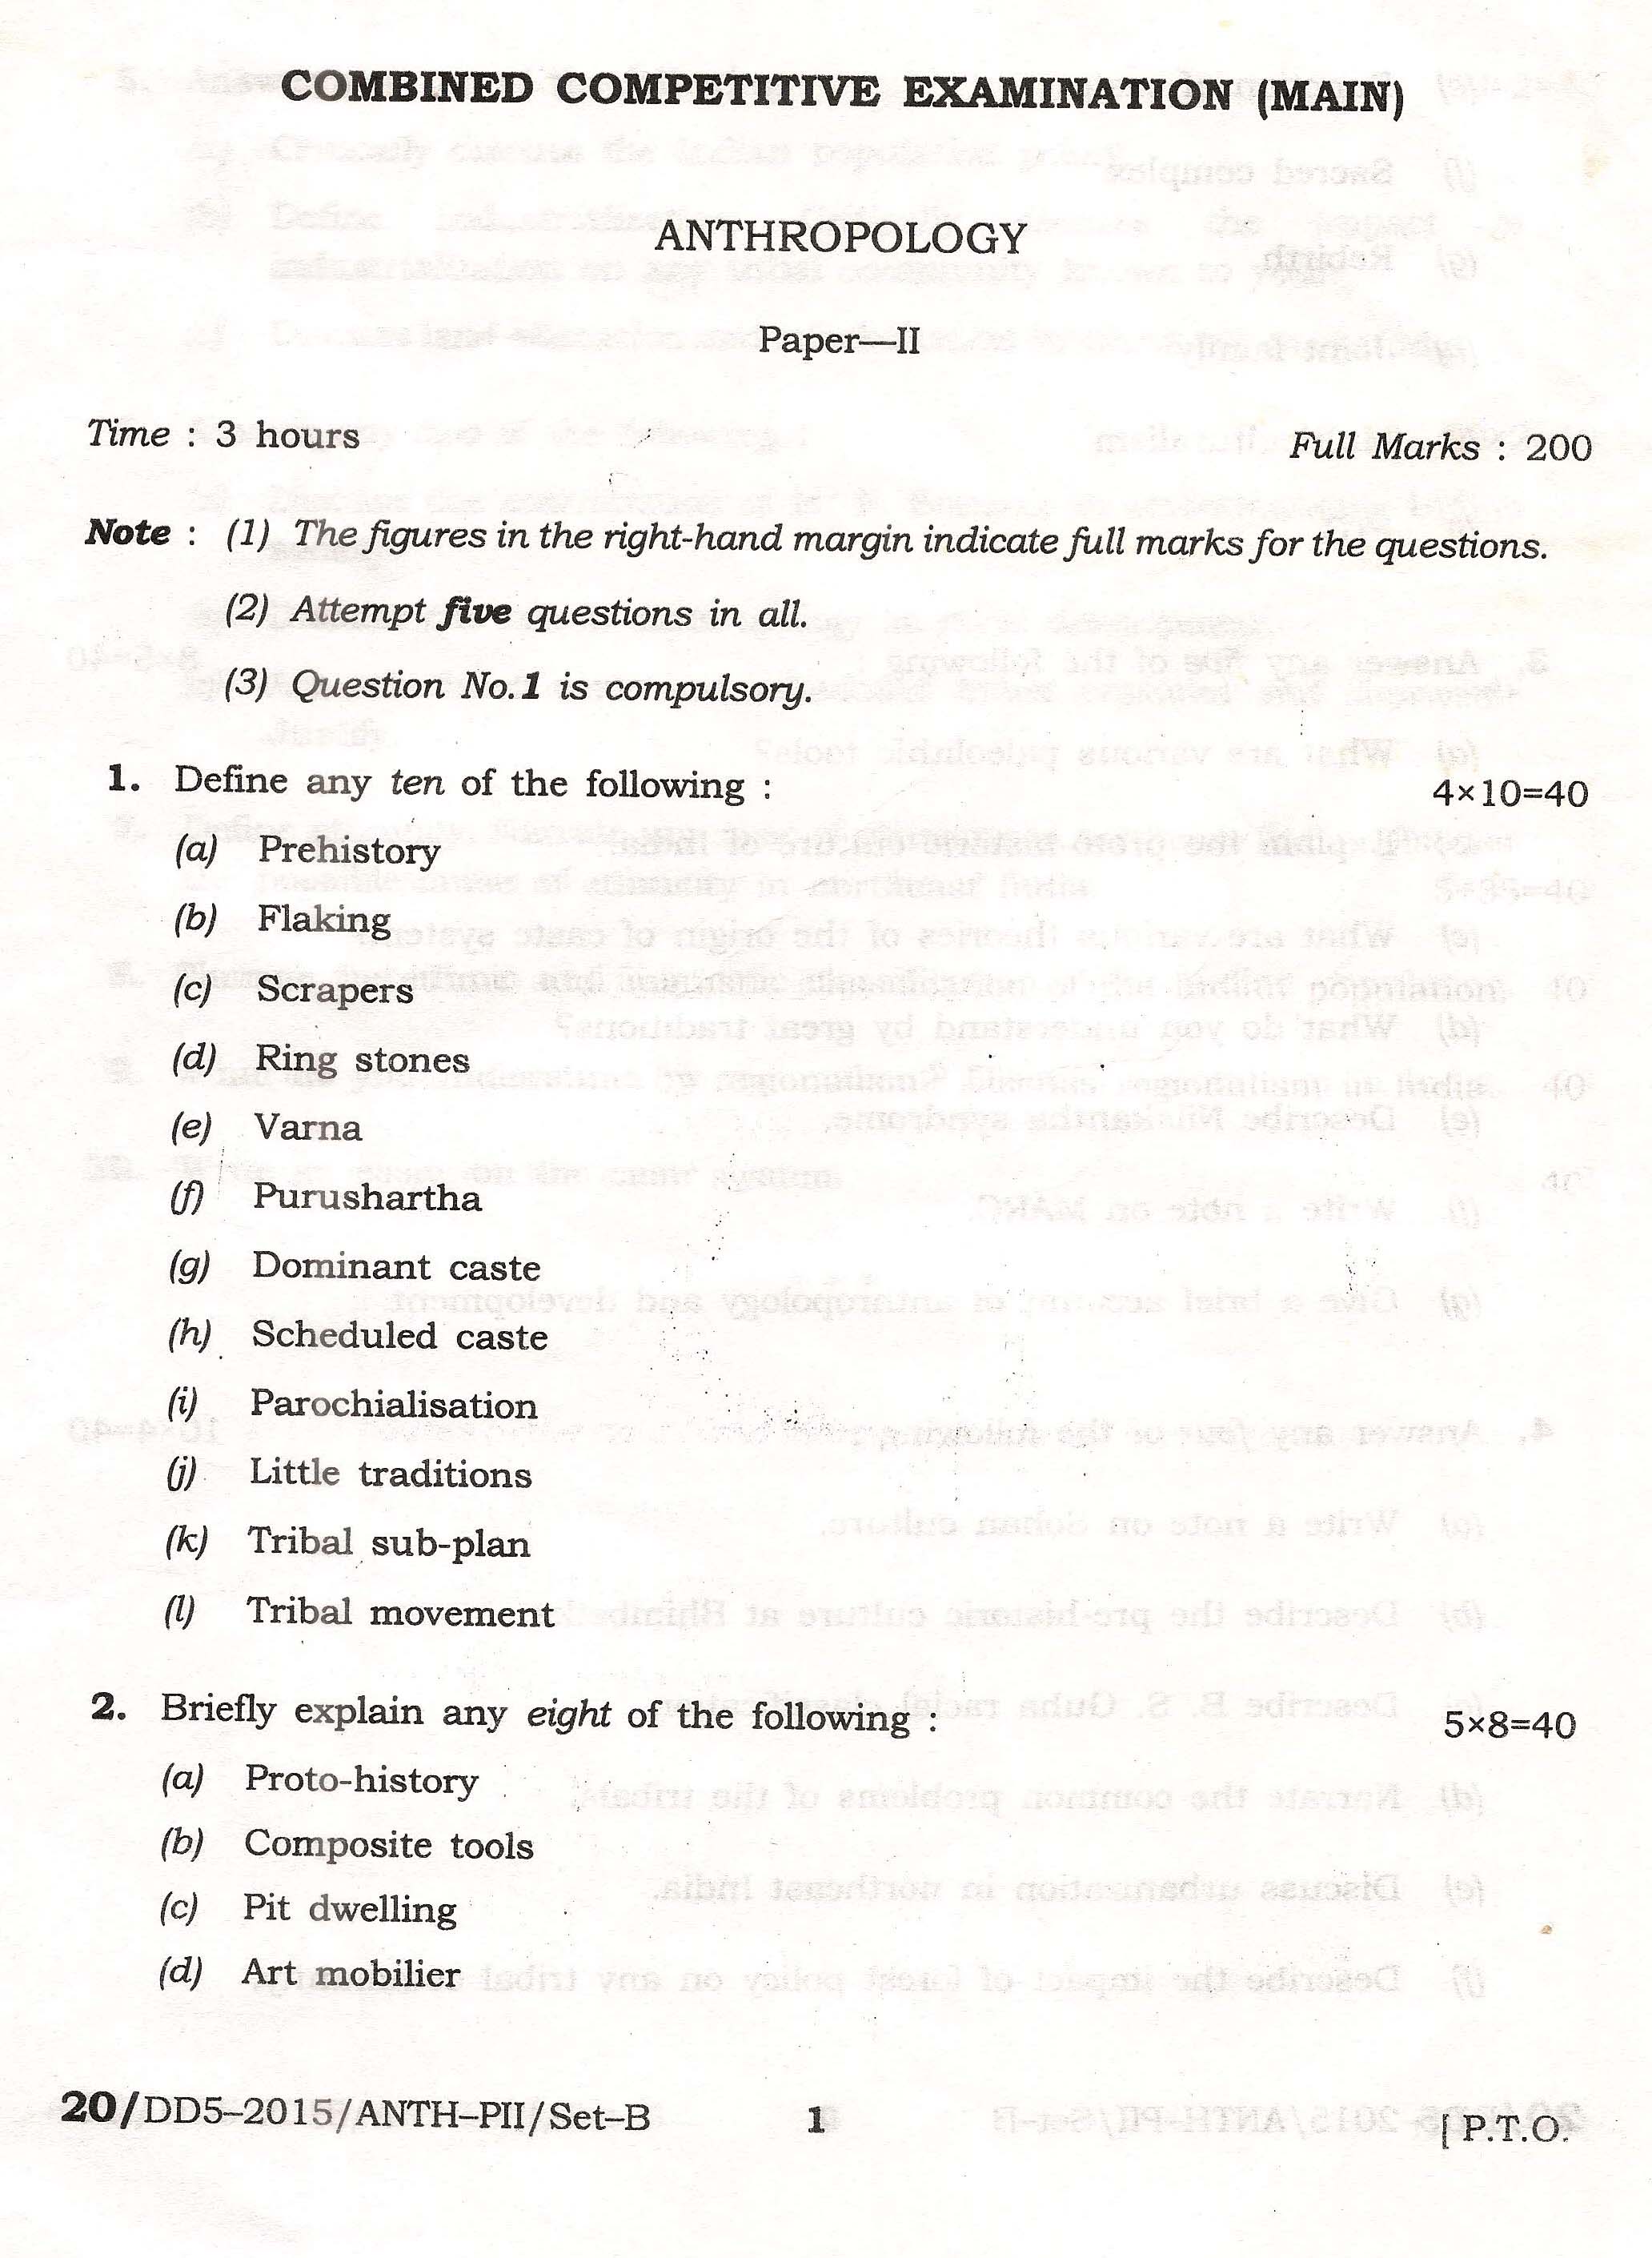 APPSC Combined Competitive Main Exam 2015 Anthropology Paper II 1